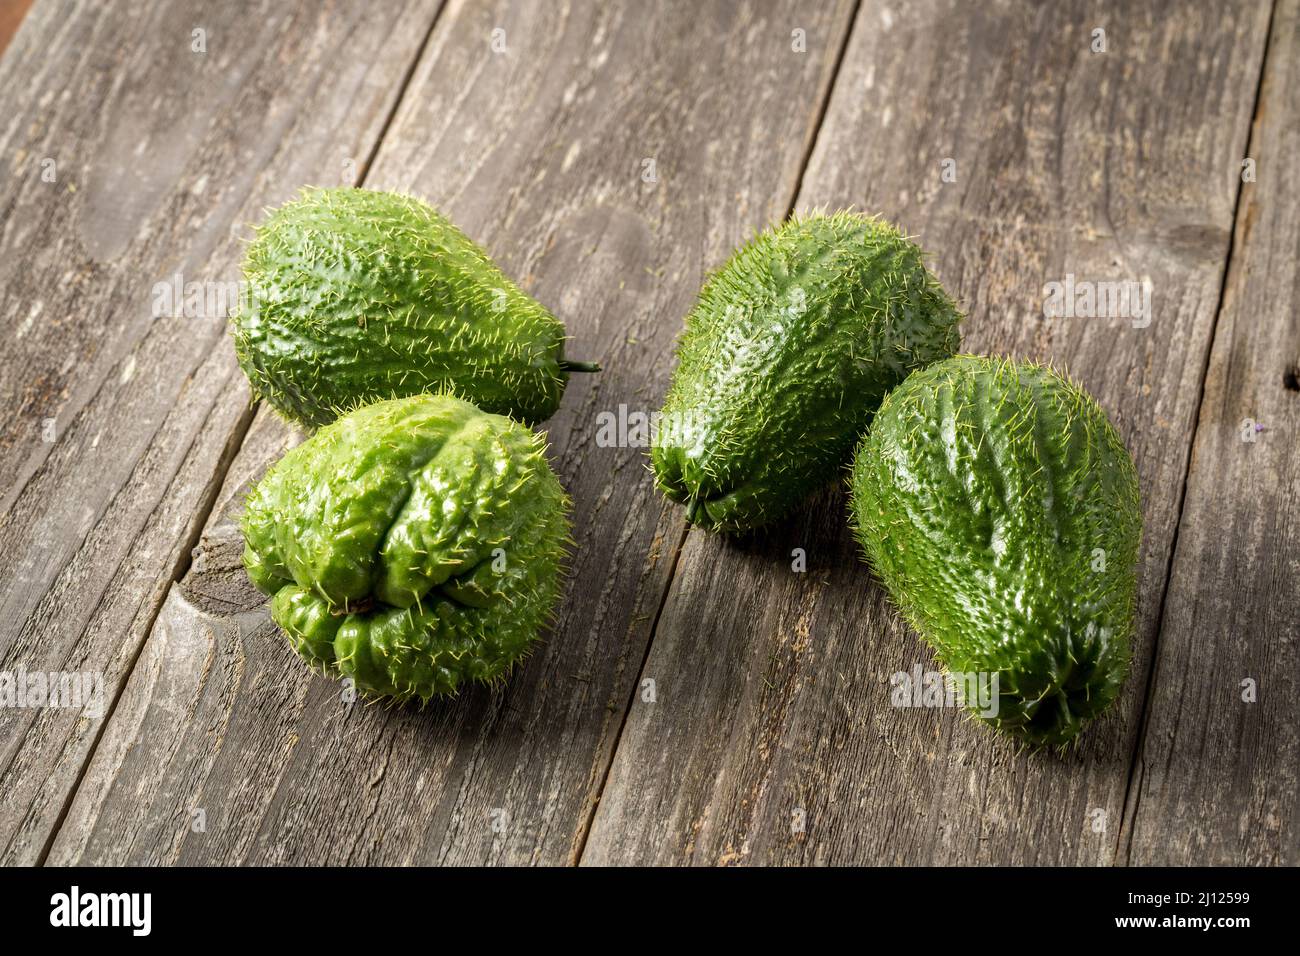 Prickly Chayote on wood background Stock Photo